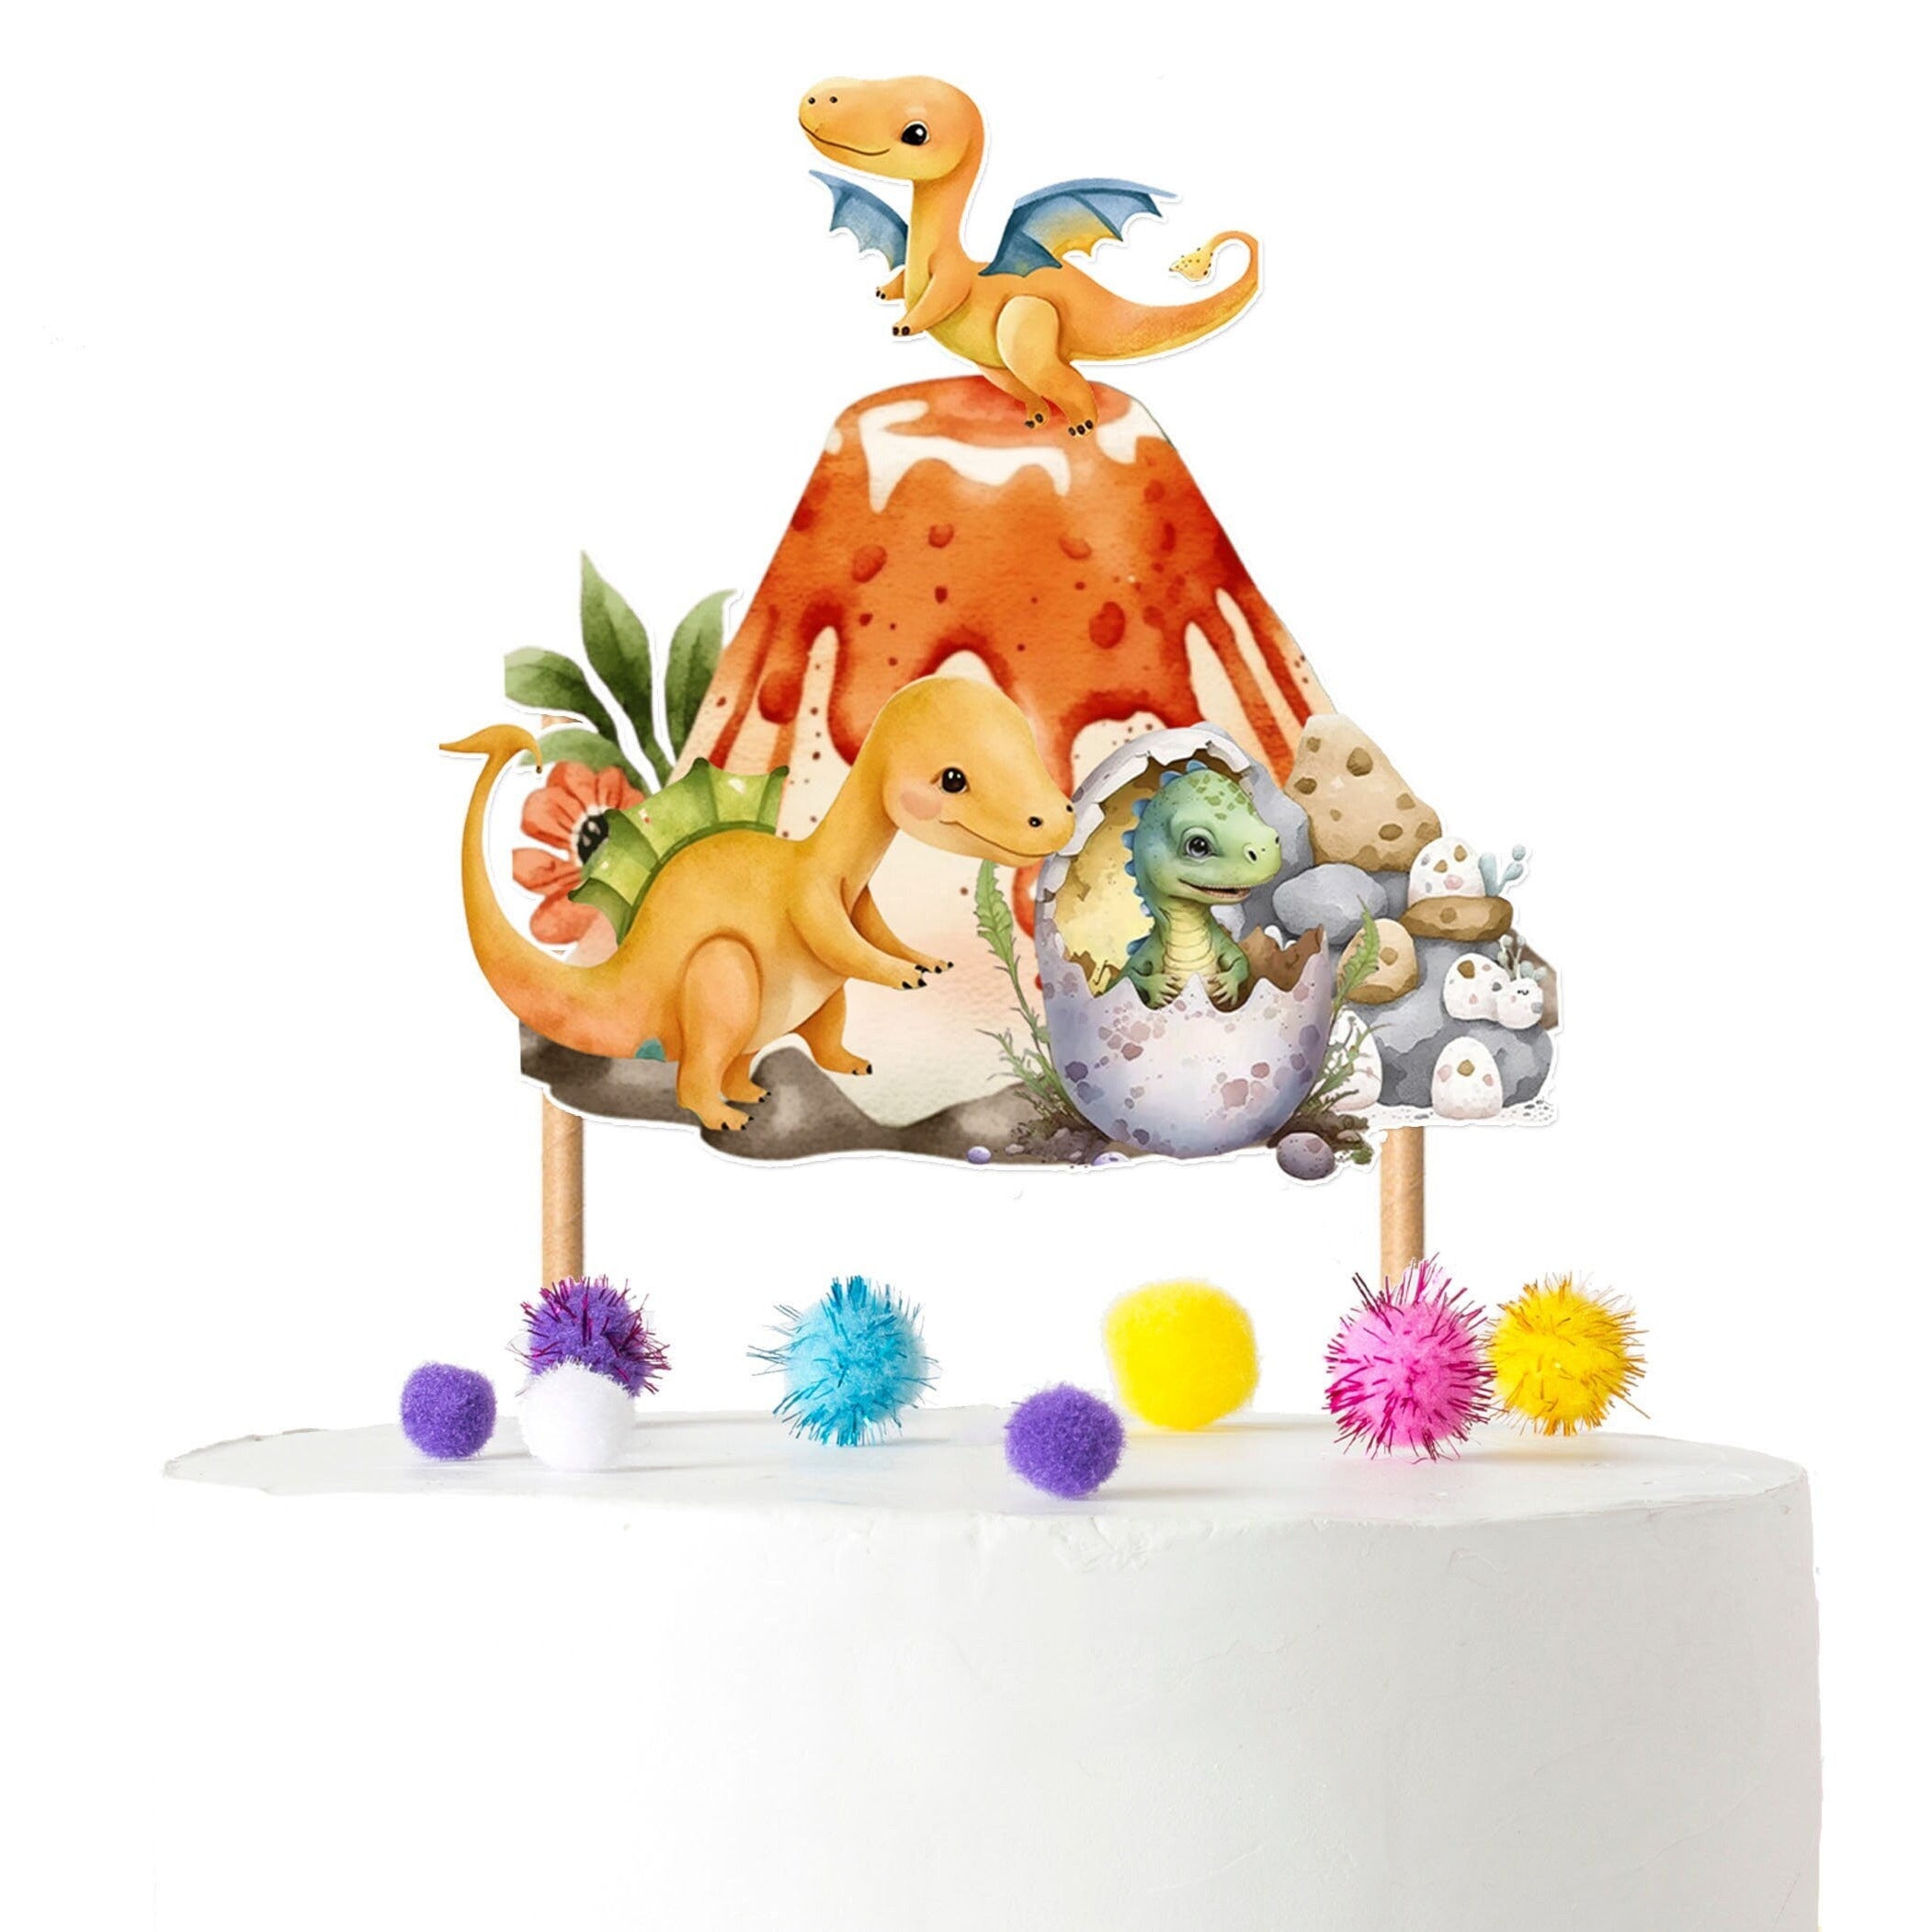 Enchanting Hatching Dragons Cake Topper – Ideal for Baby Showers and Birthday Parties